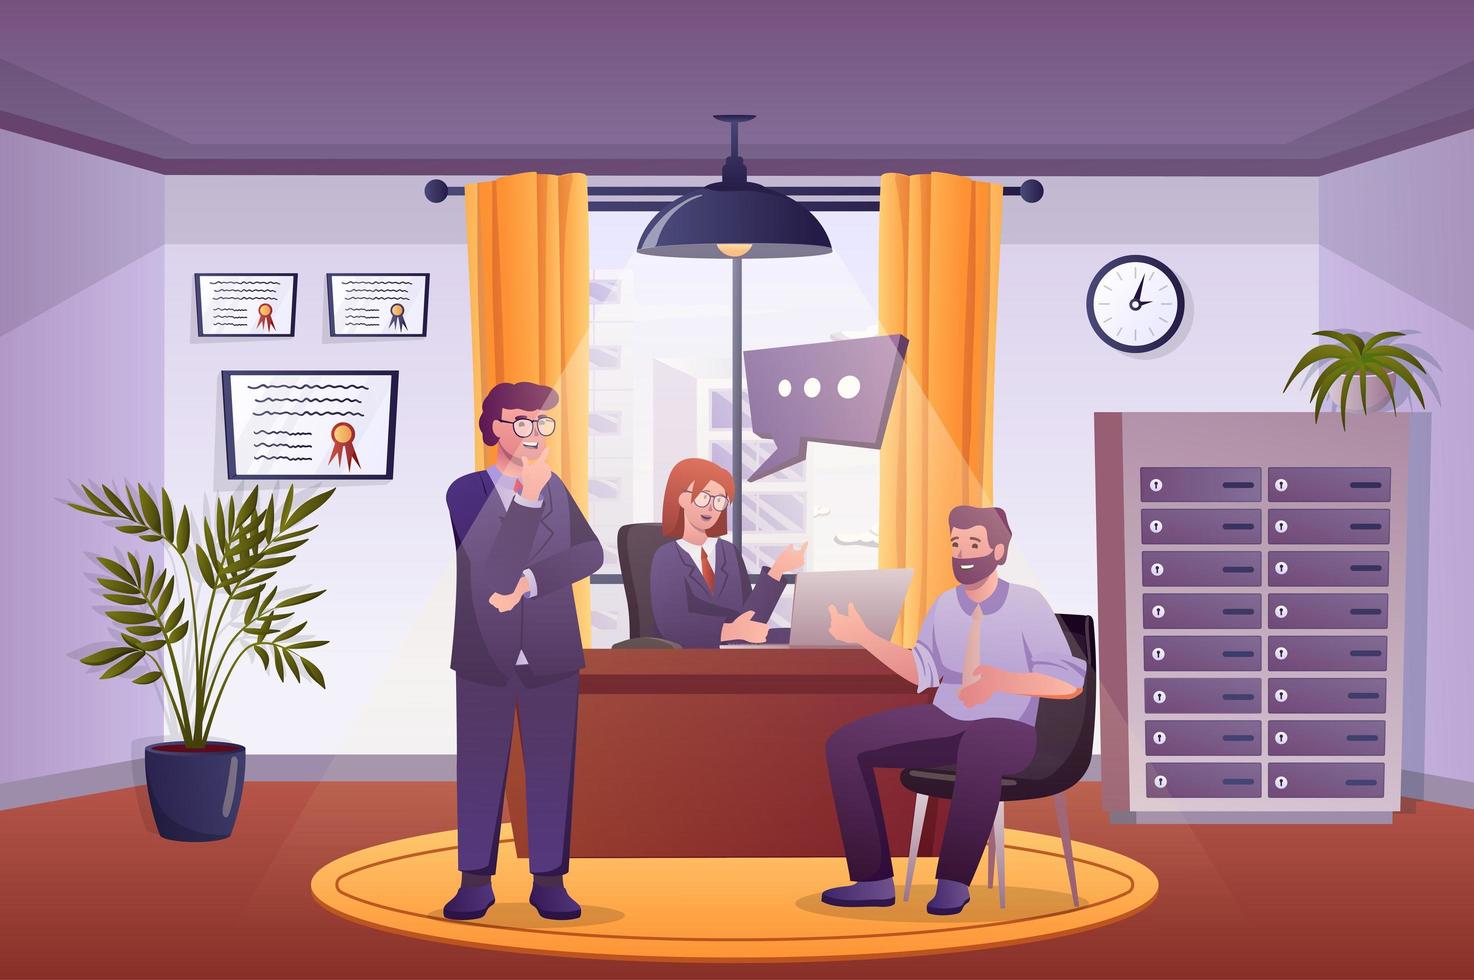 Work interview concept in flat cartoon design. Job applicant talks to HR team managers in office. Recruitment process, looking for new employee. Vector illustration with people scene background